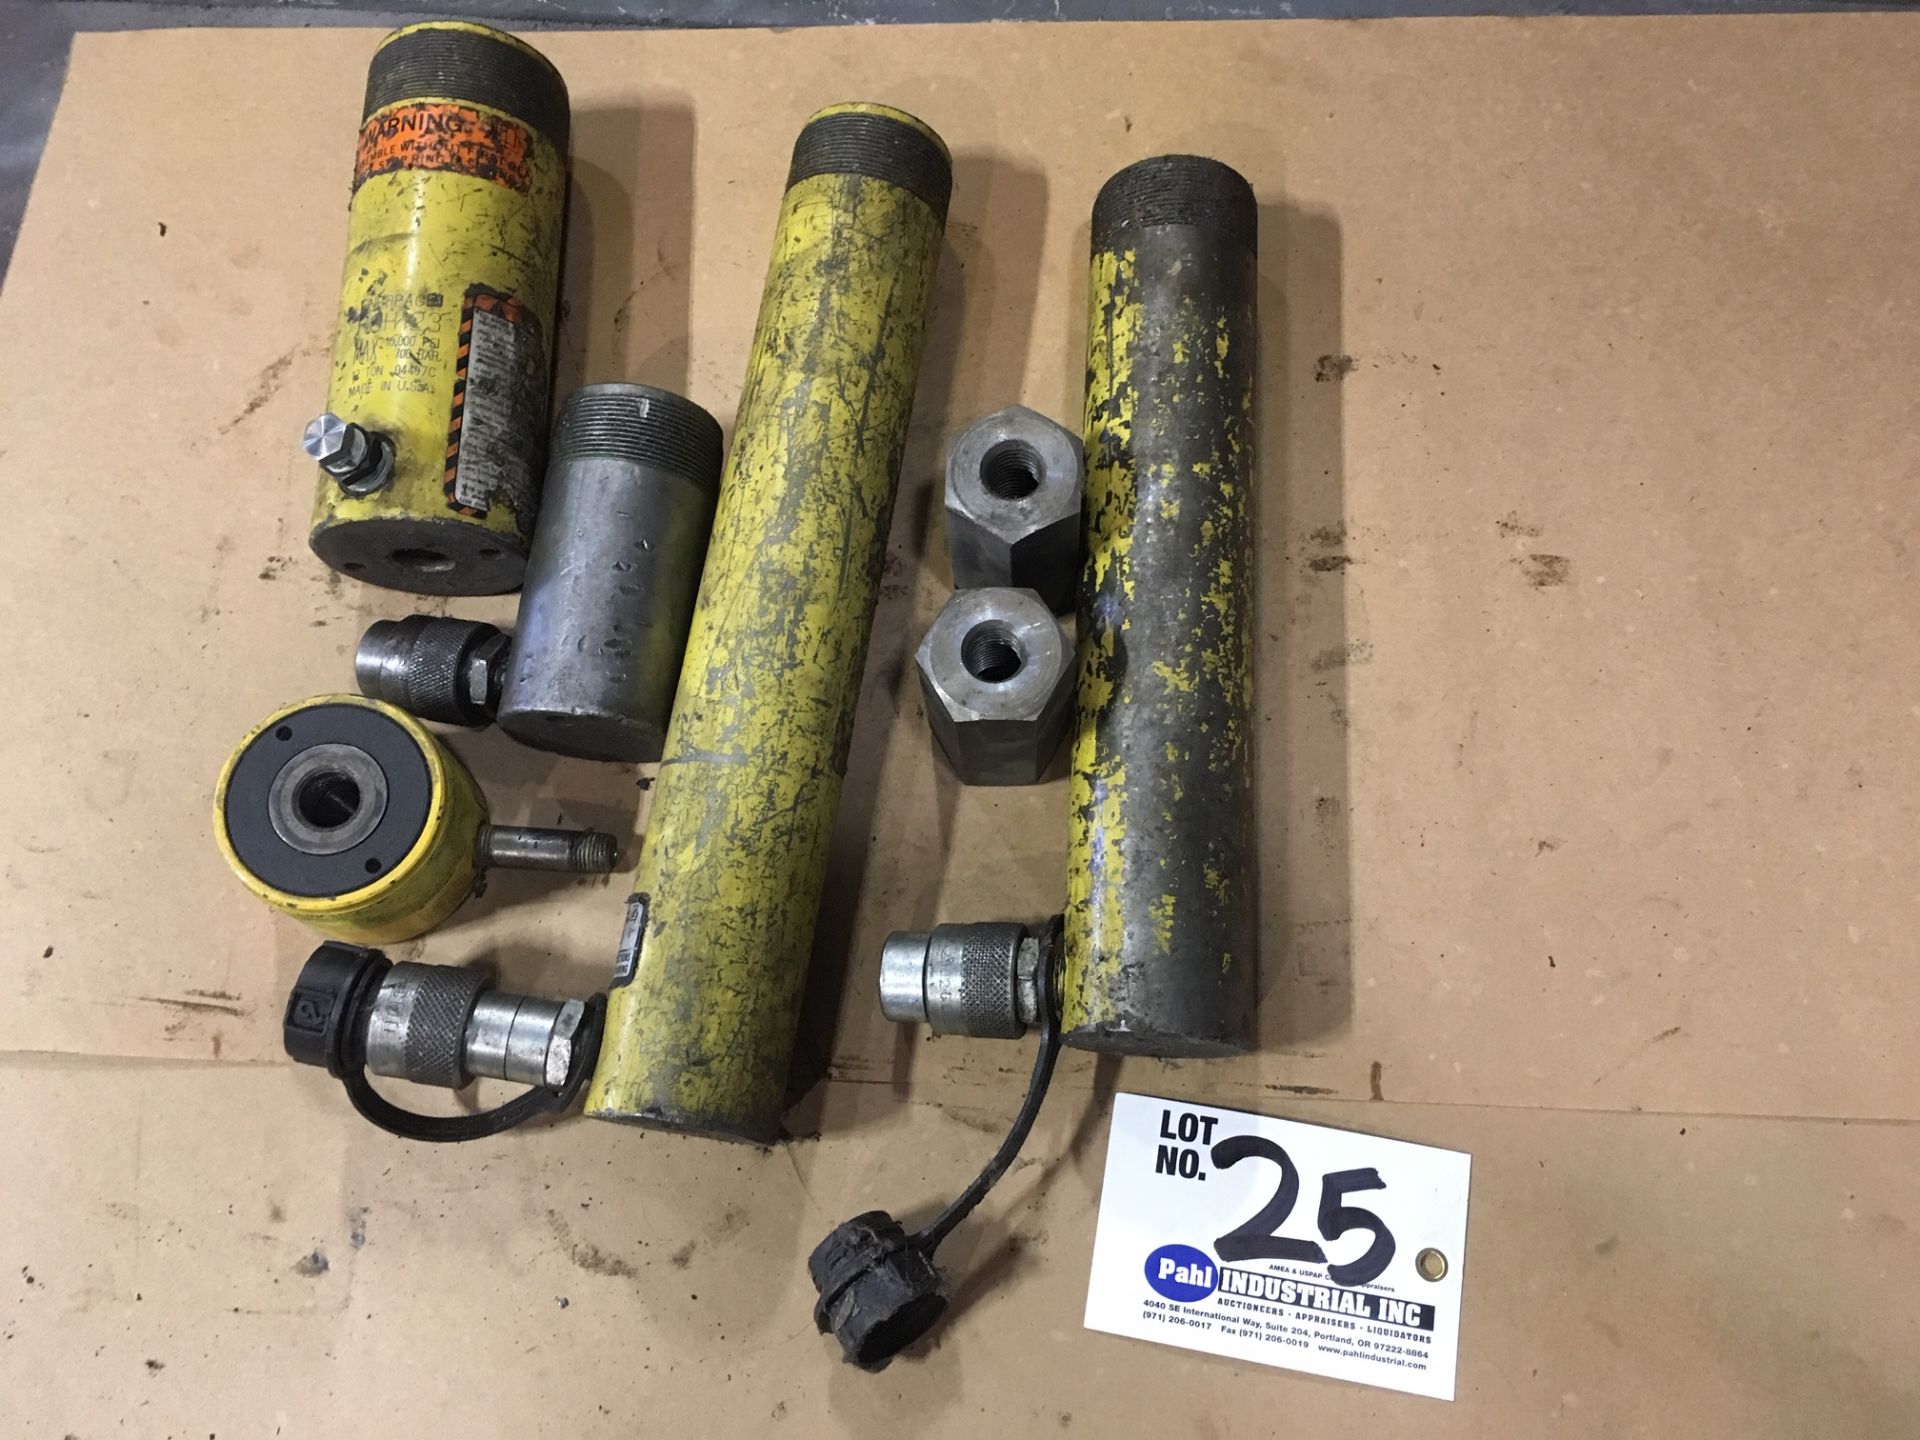 Enerpac 12-Ton, (2) RC 1010, (2) 5-Ton jacks with hose and fittings